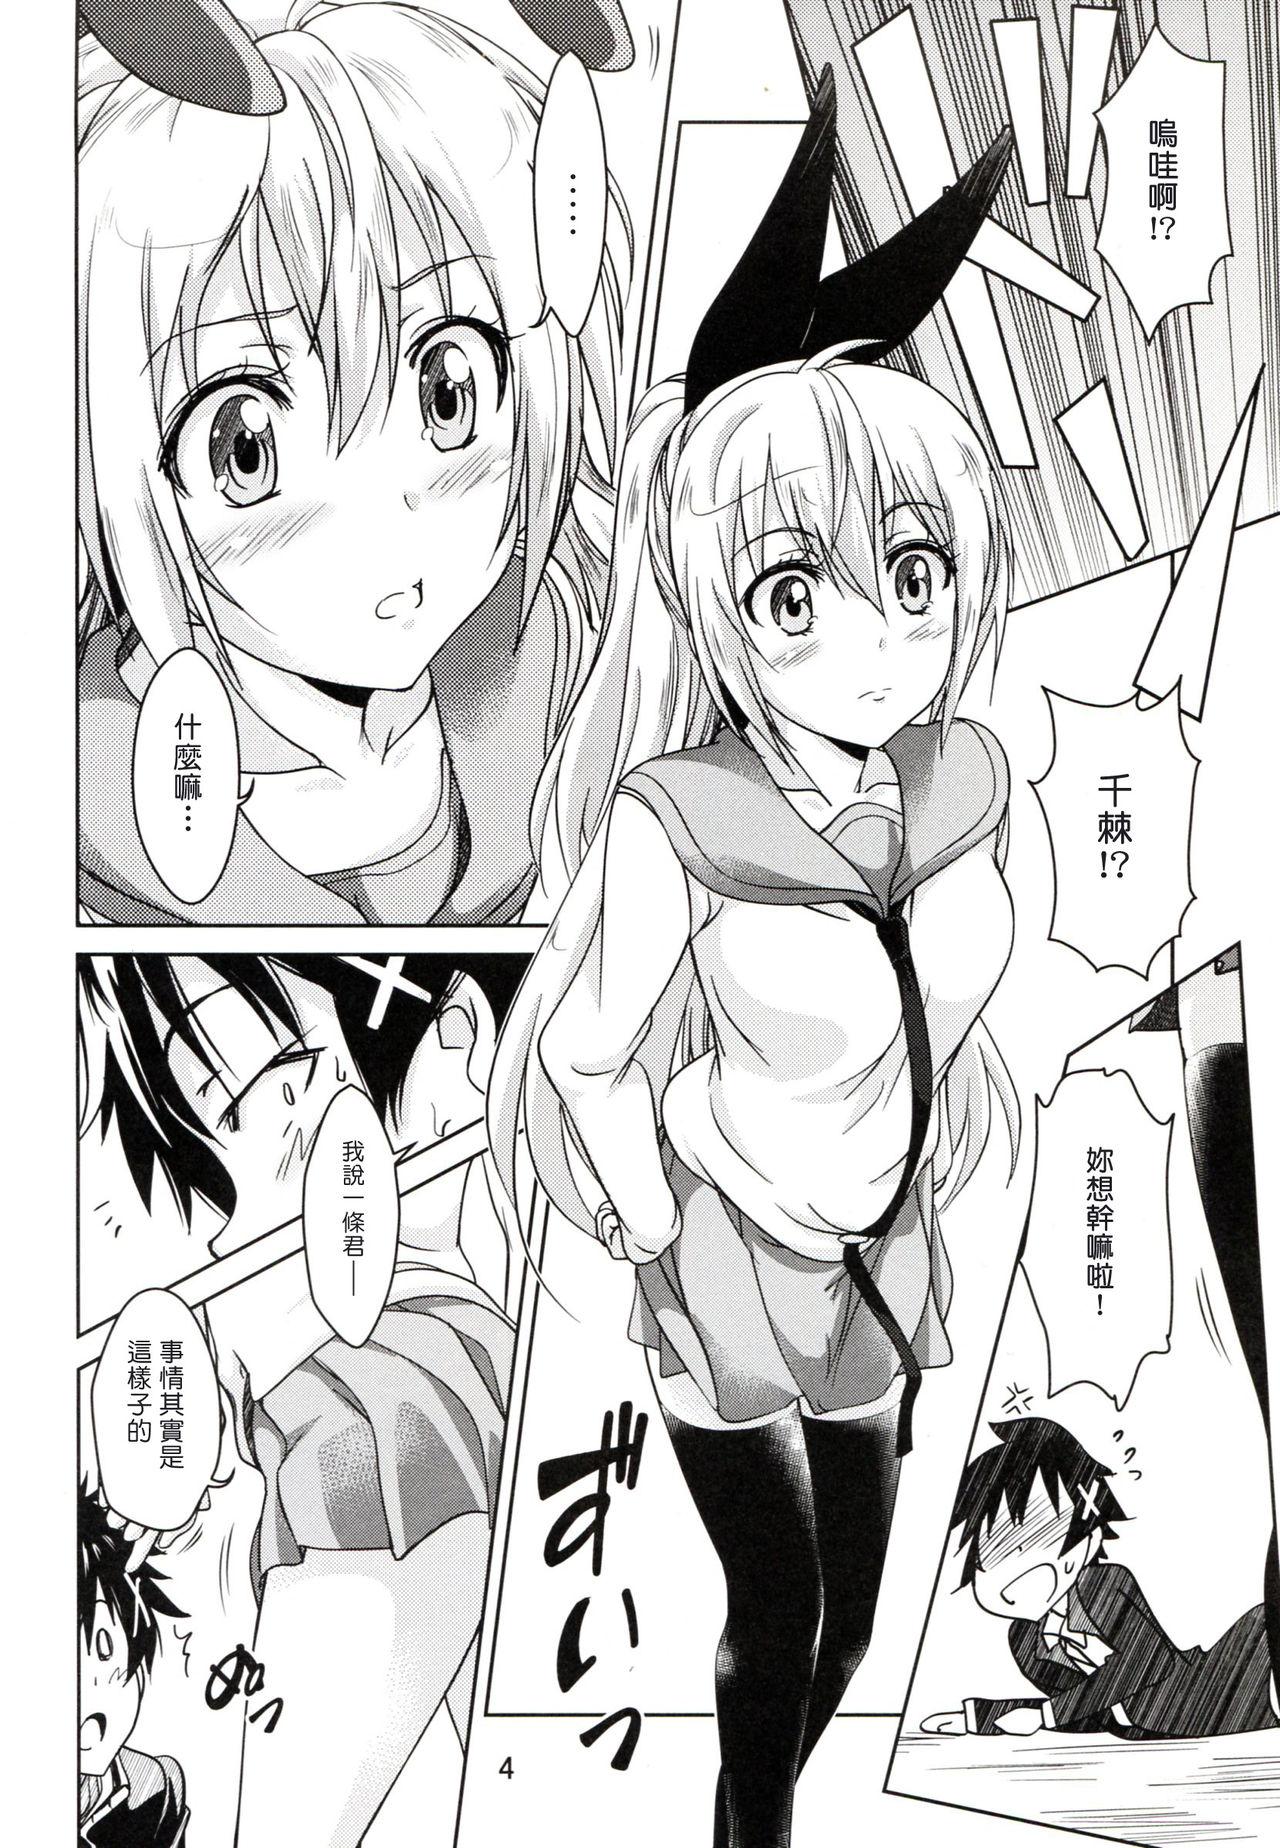 Parody CLICK CLICK - Nisekoi Role Play - Page 4